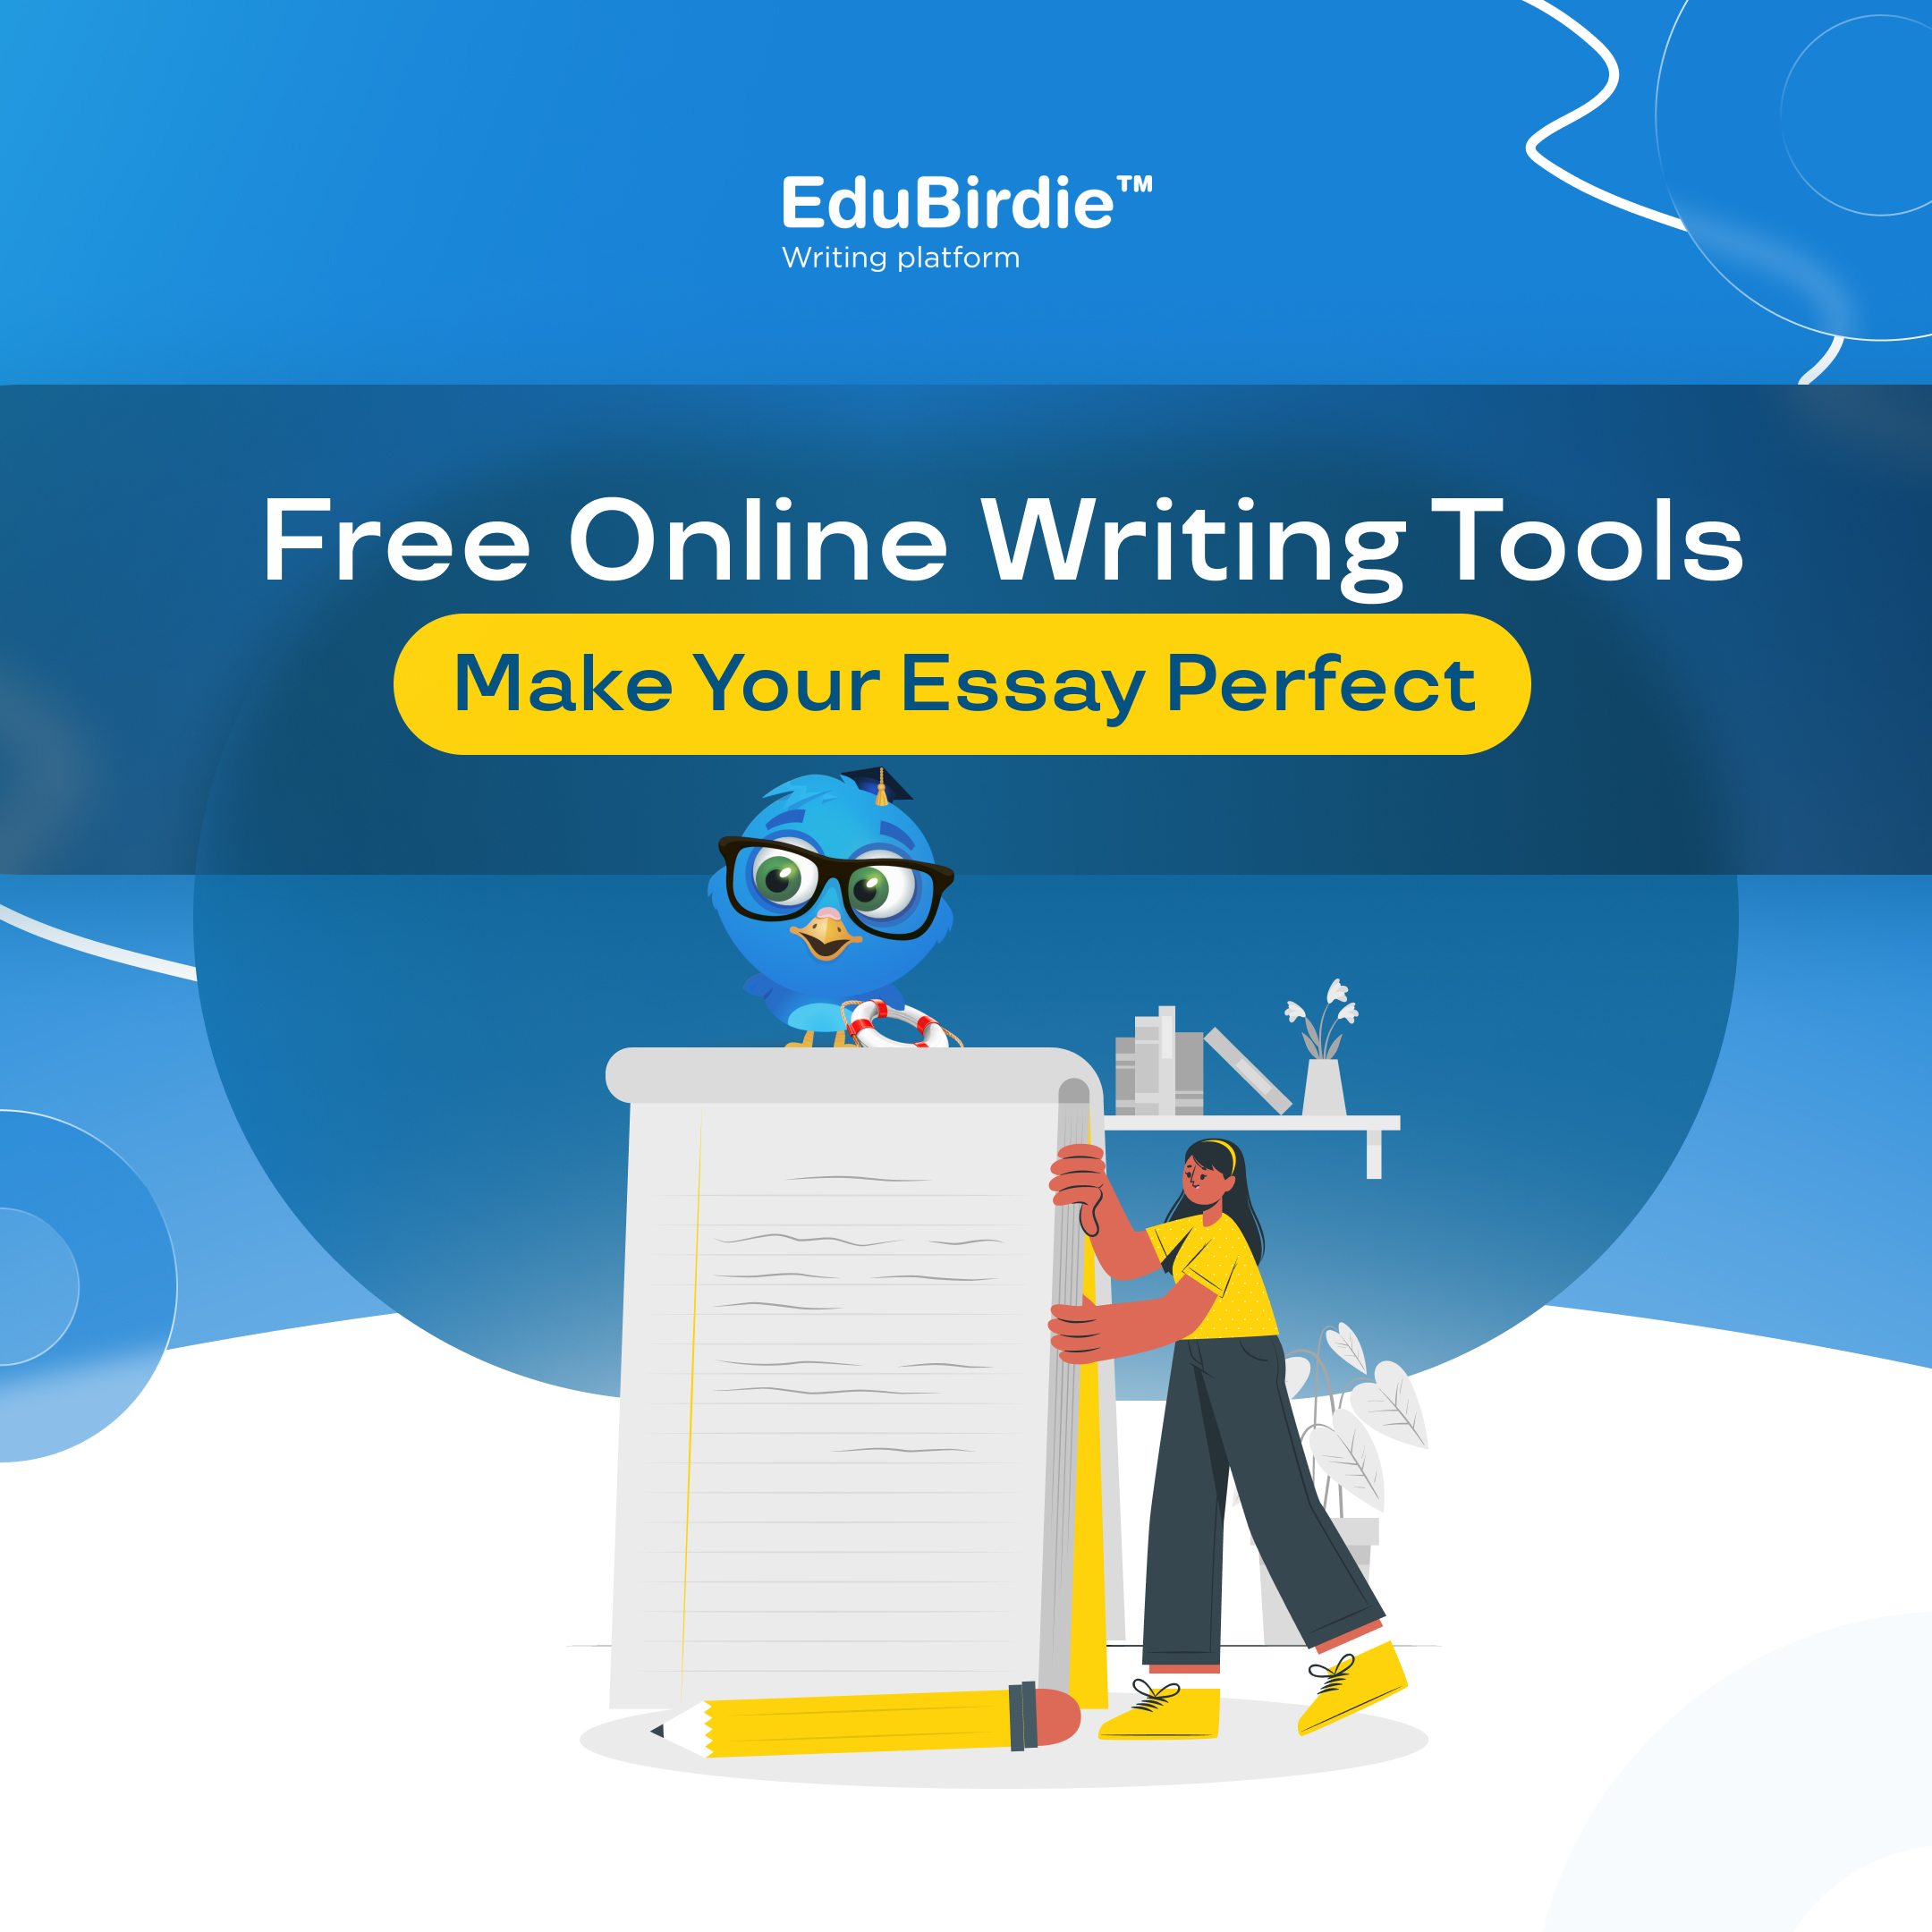 7 Easy Ways To Make essay writing service Faster